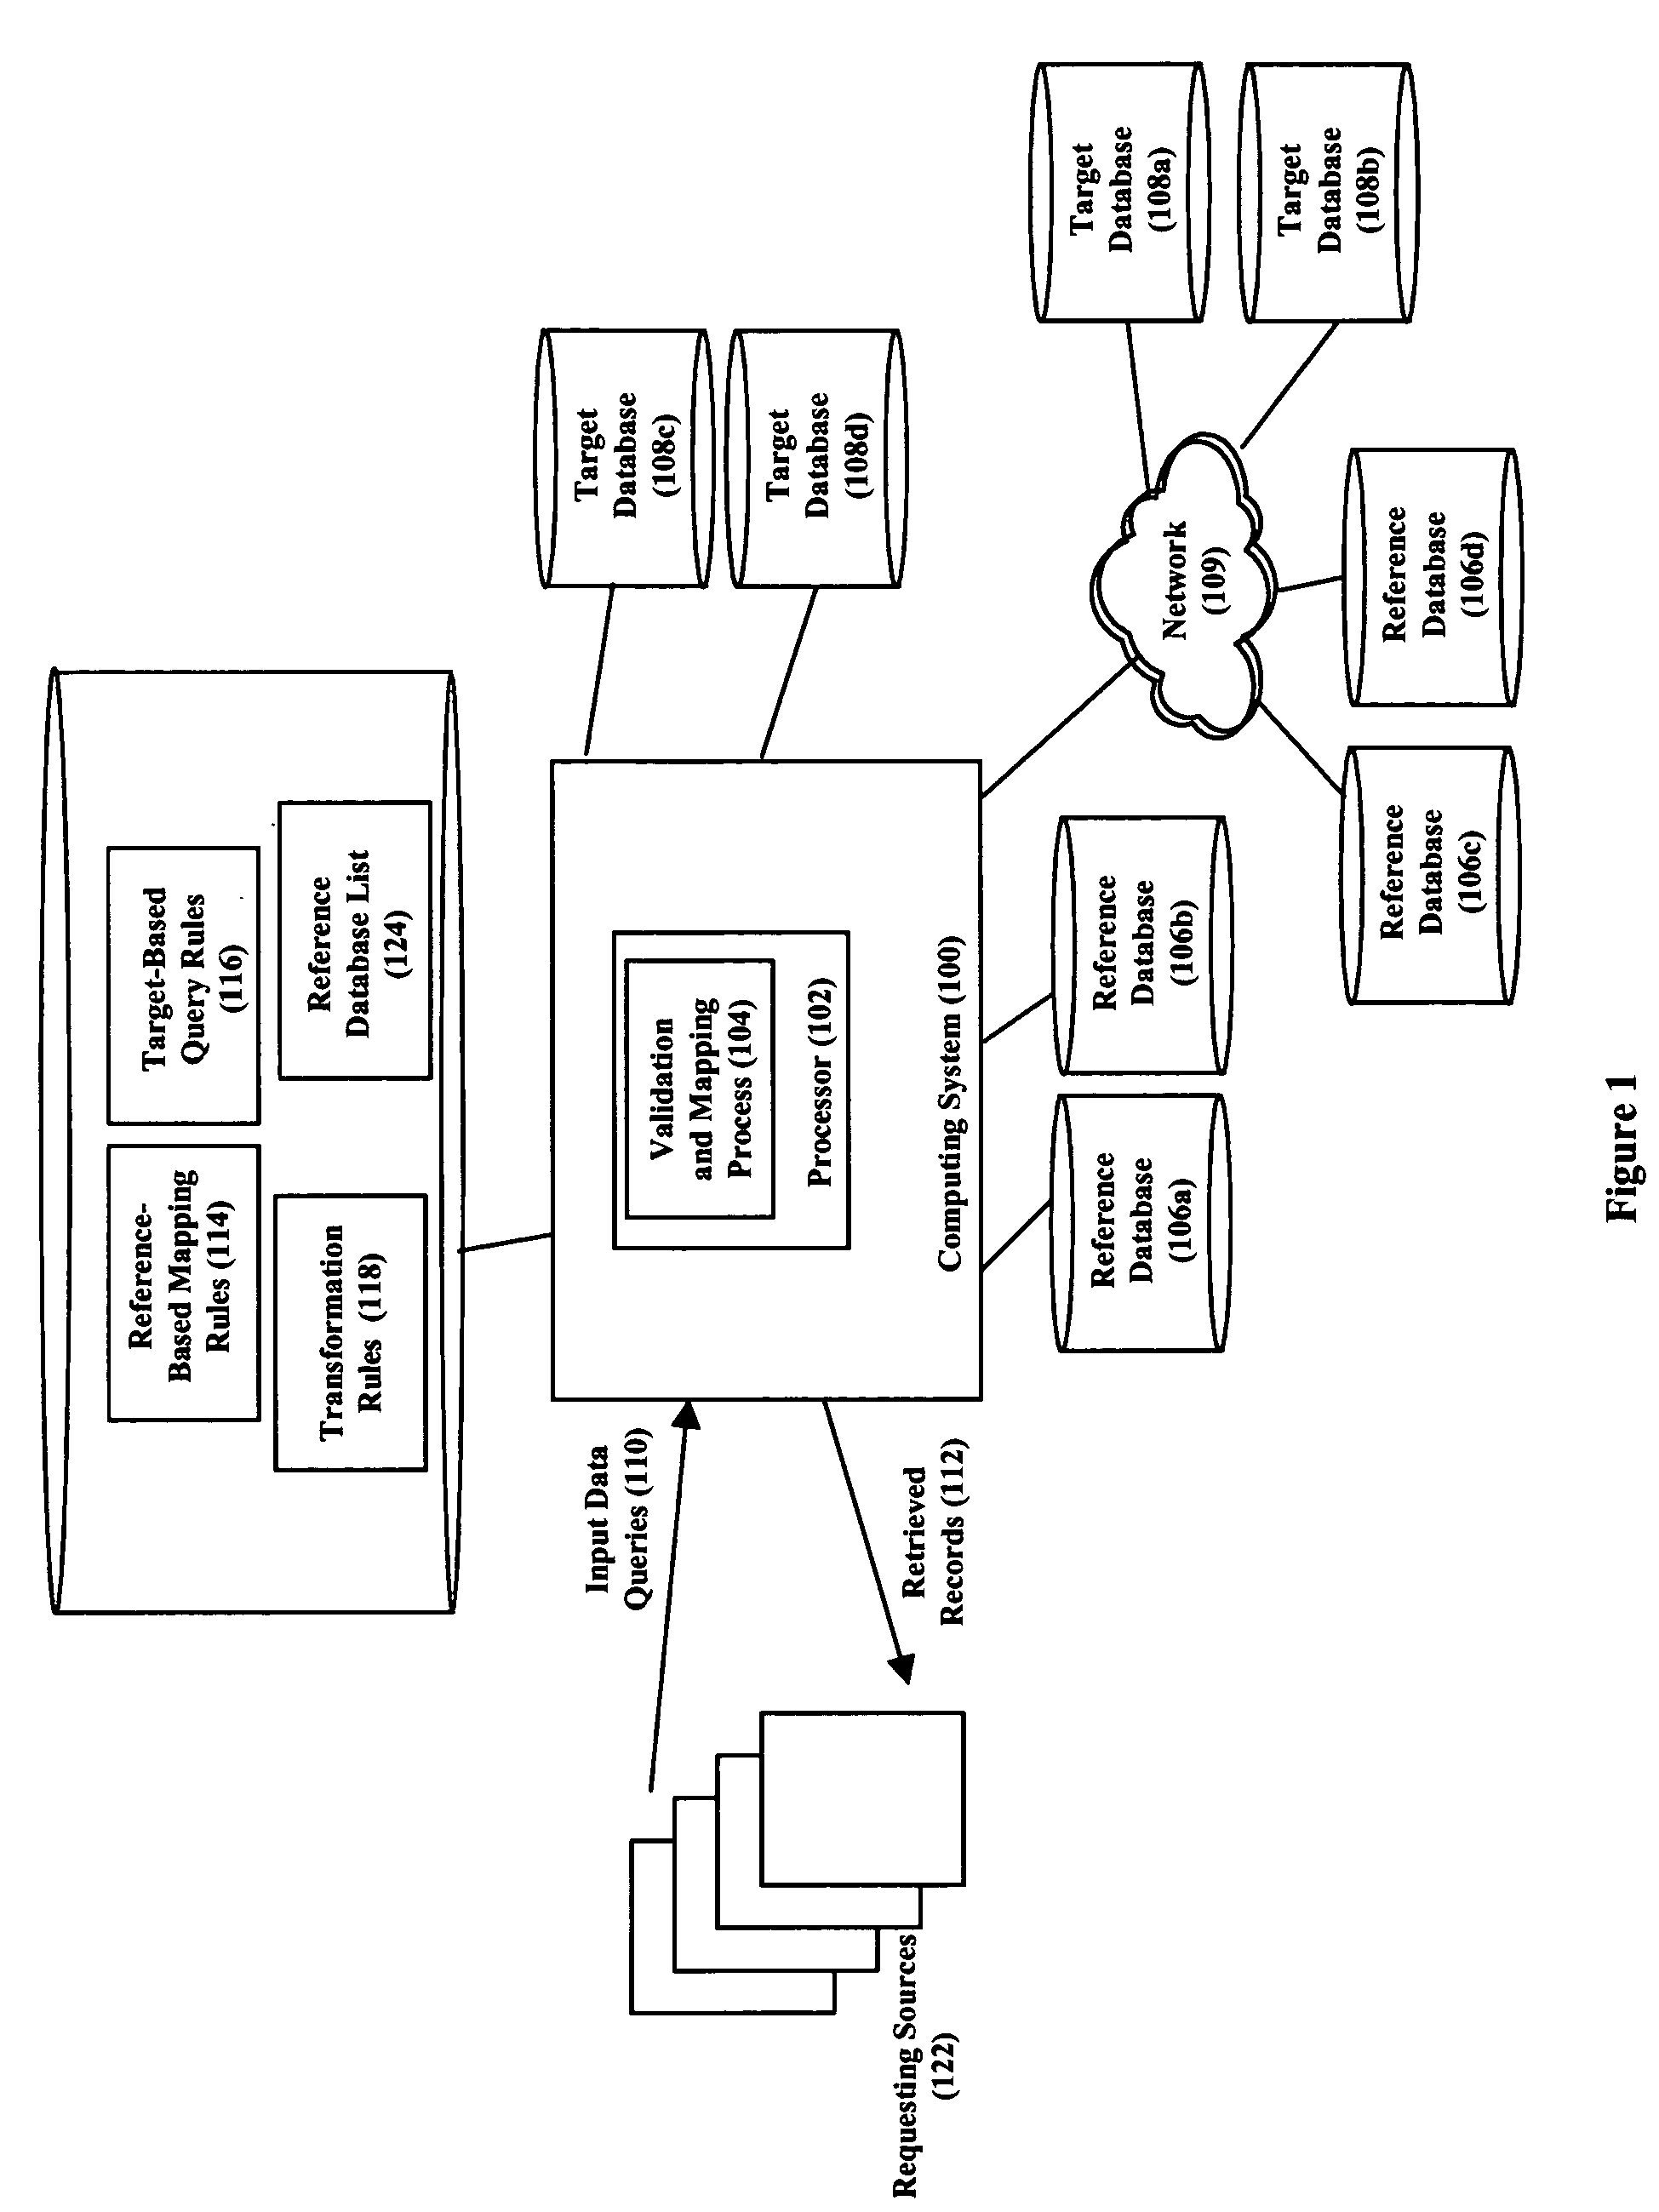 Two-stage data validation and mapping for database access